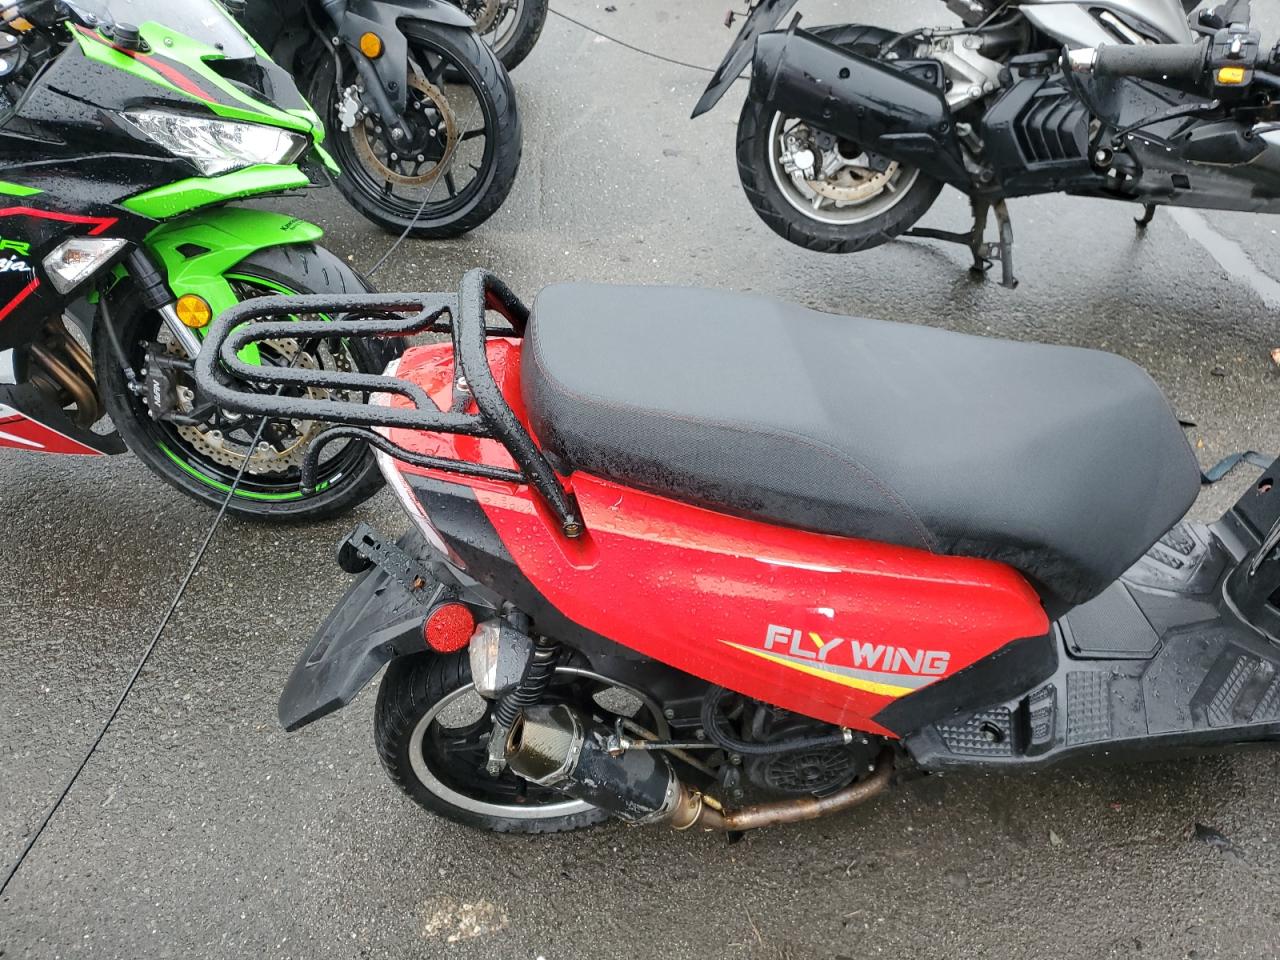 2021 Znen Scooter for sale at Copart Brookhaven, NY. Lot #41738 